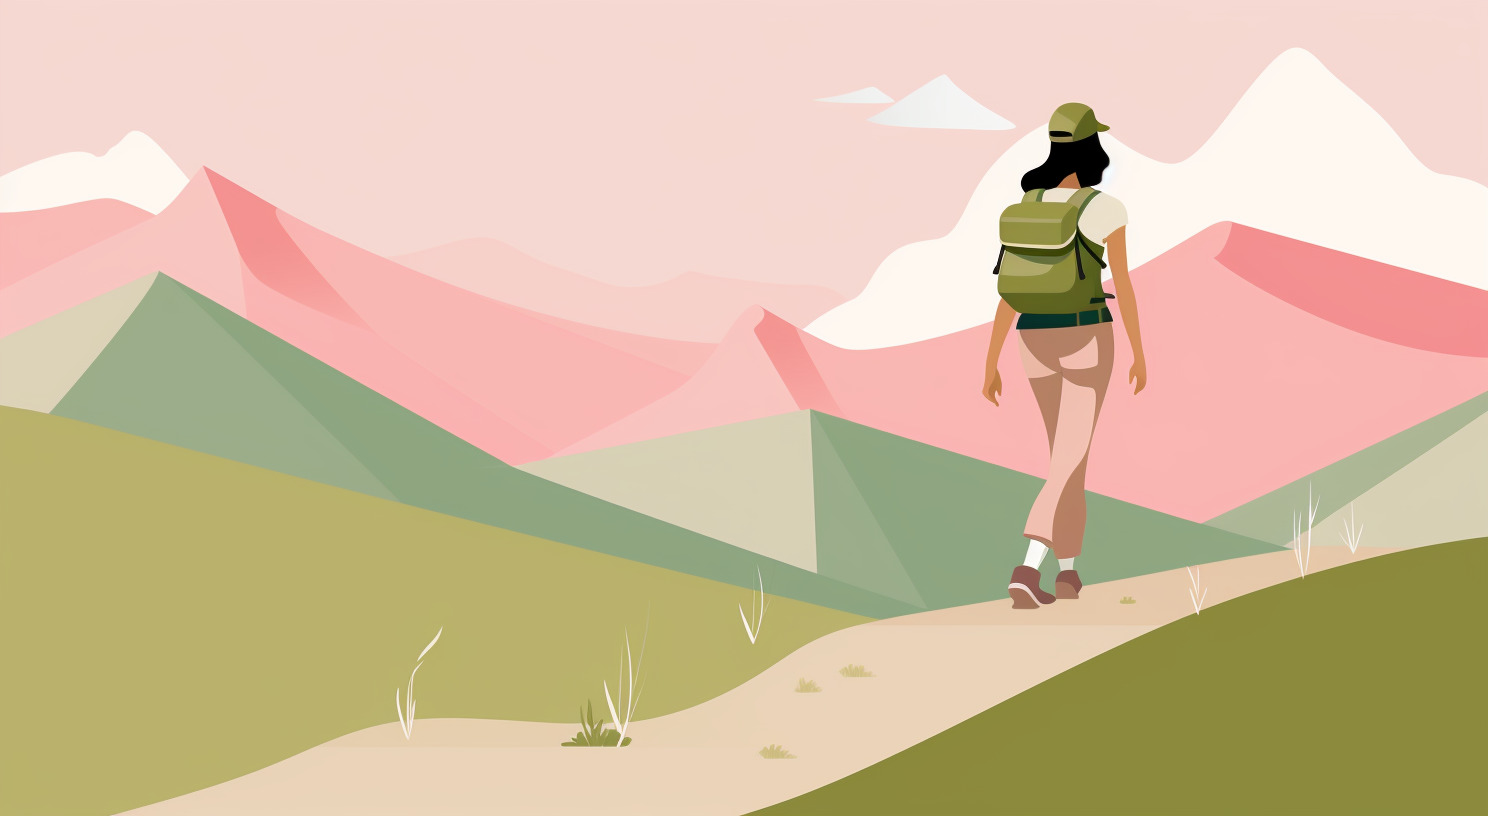 A colorful drawing of a woman hiking through mountains.